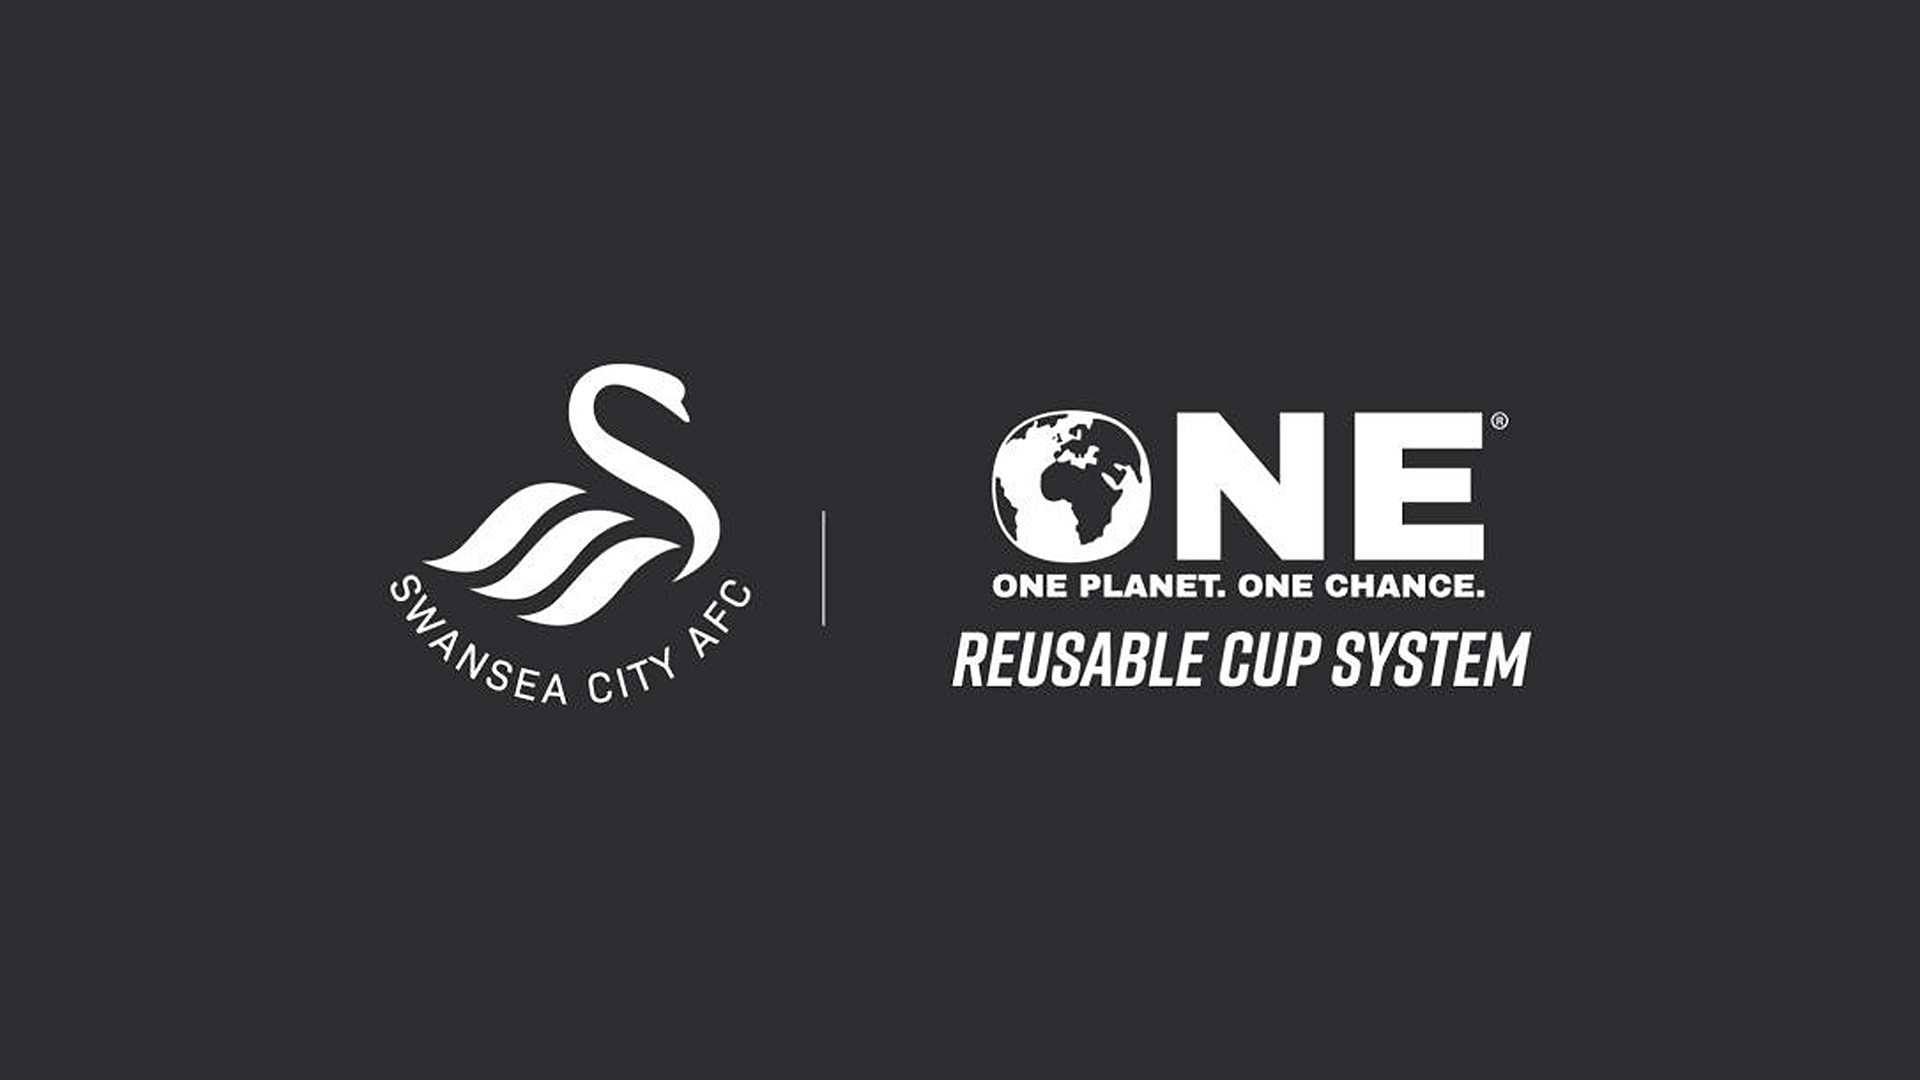 Swansea City partner with EVENT CUP SOLUTIONS TO ENCOURAGE SUSTAINABILITY